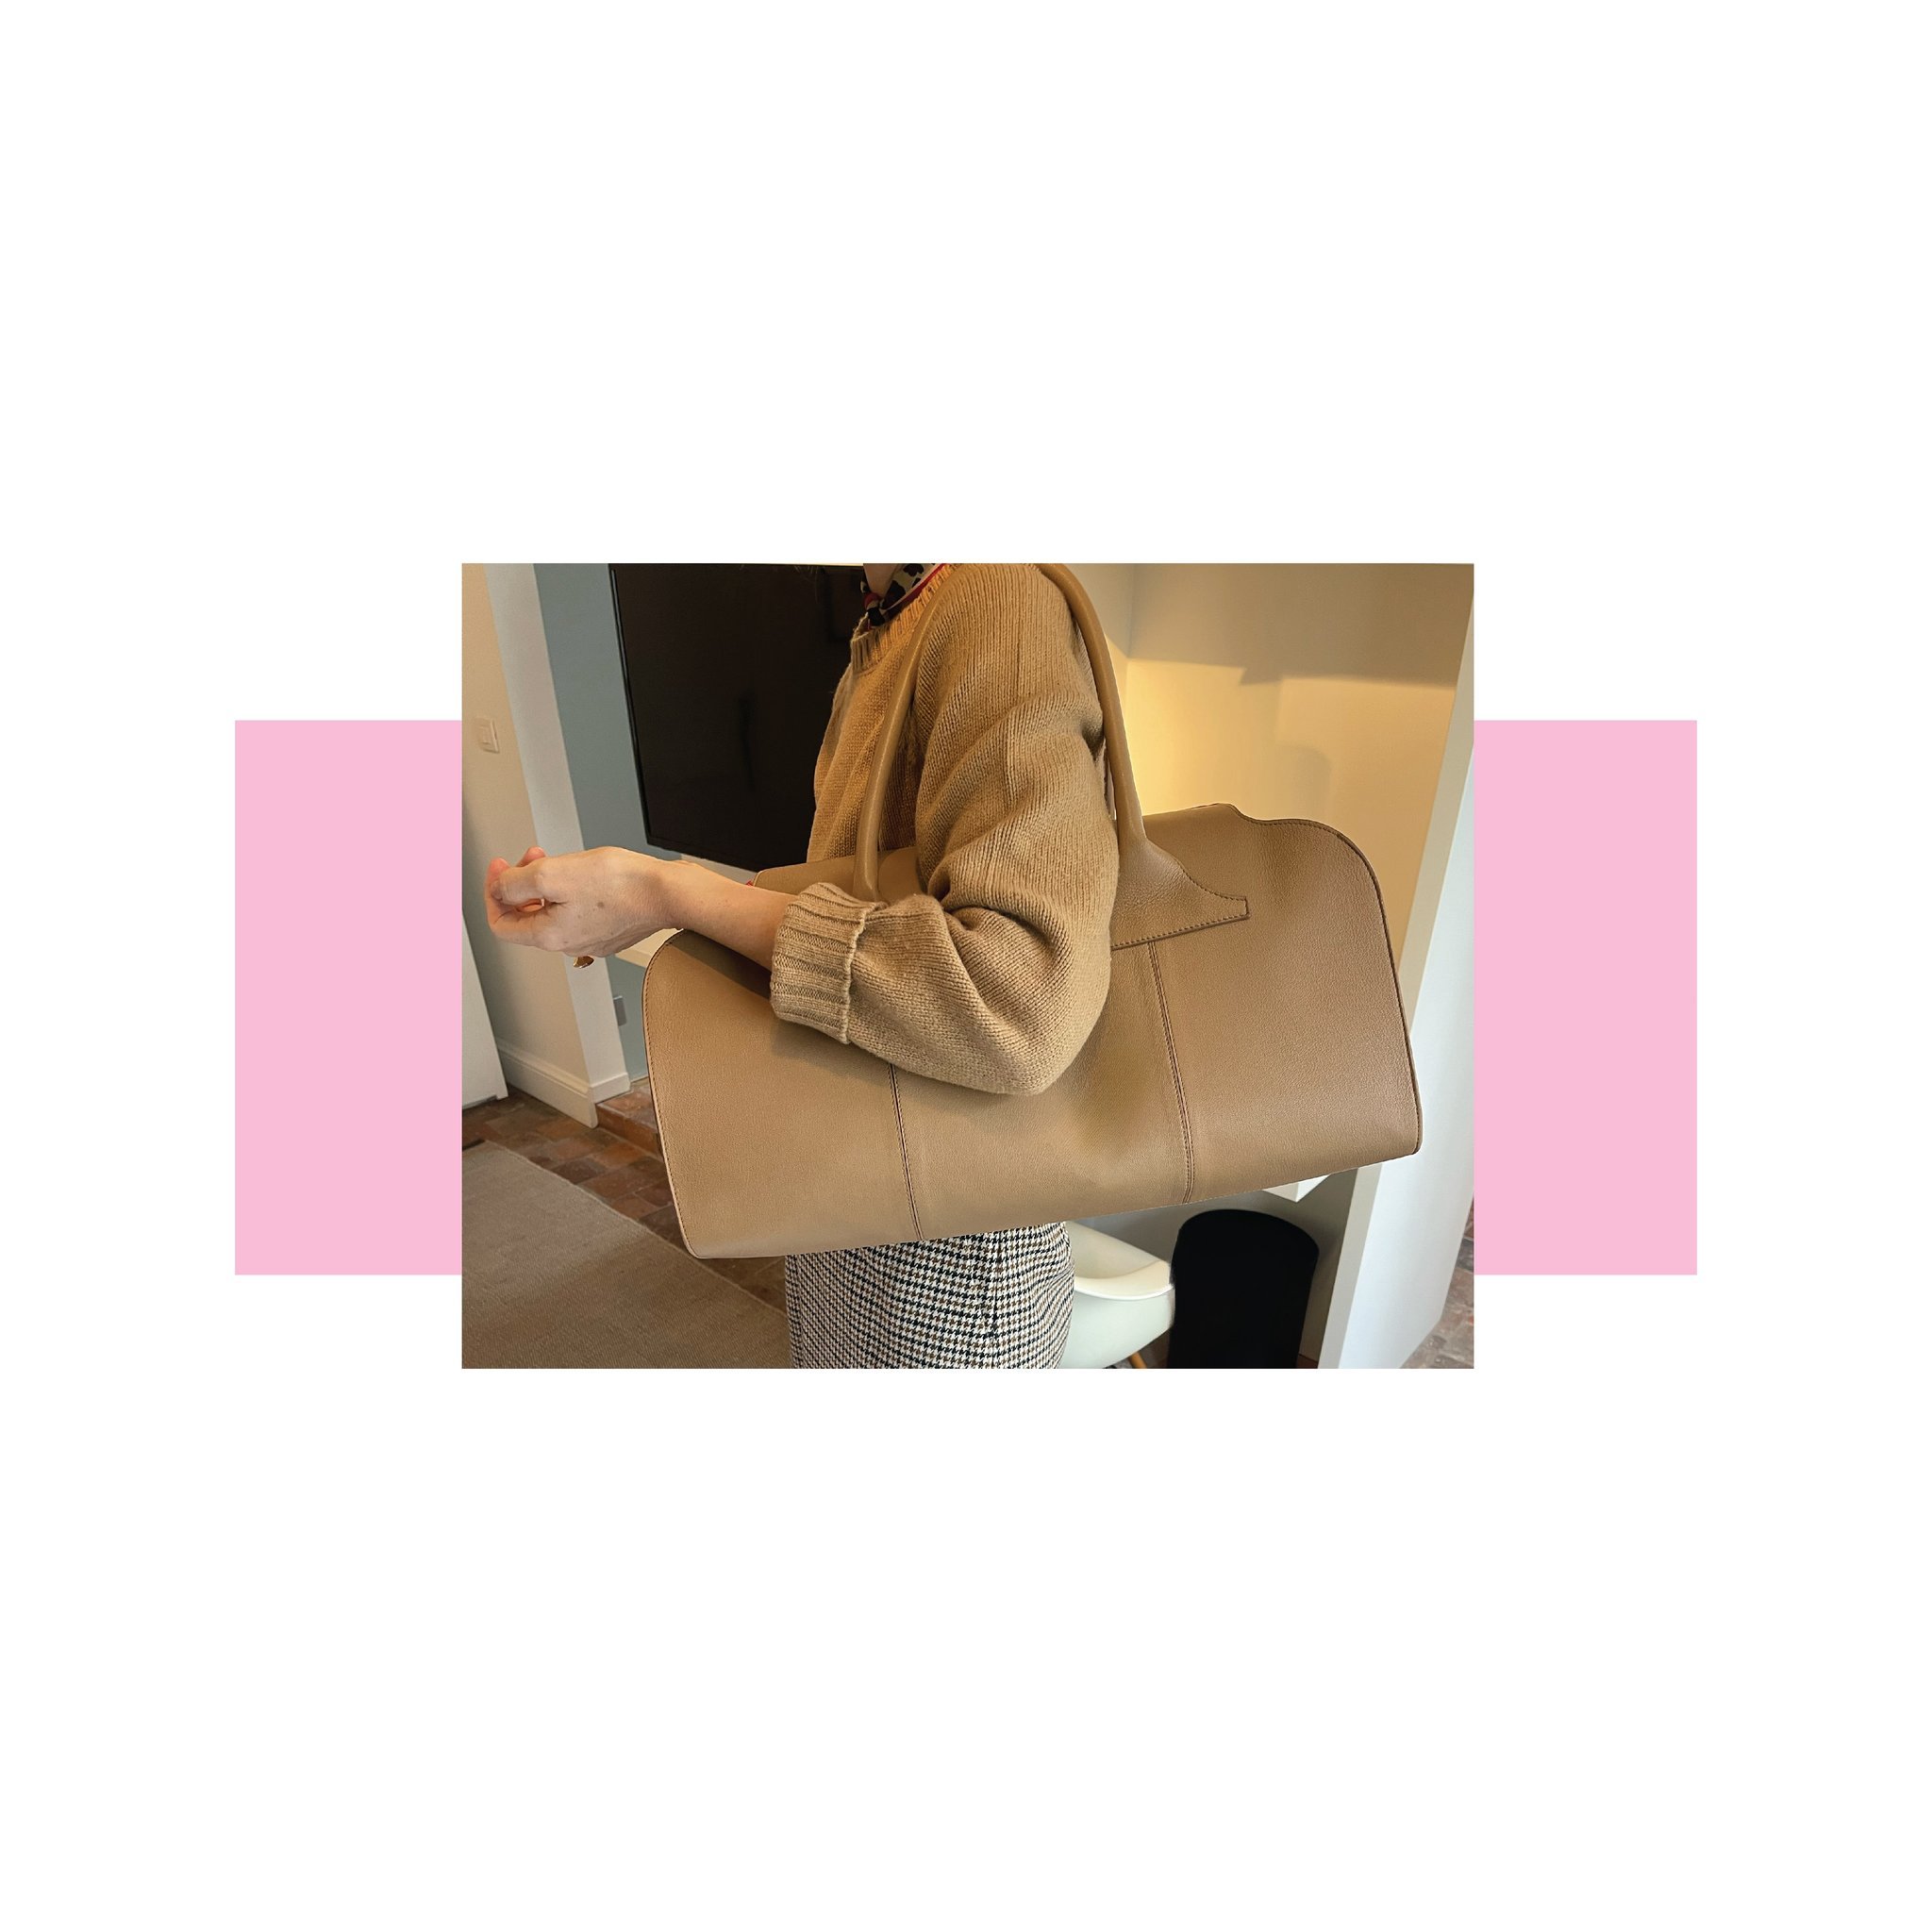 OVER &amp; OUT &hellip;!

(Coming soon - The Great Escape Bag)

#travel #carryon #weekender #holdall #jetset #holiday #escape #tan #oooohlala #luggage #thegreatescape  #madeinitaly #designedinlondon #designerhandbag #innis #innisbags #bag #fashion #b